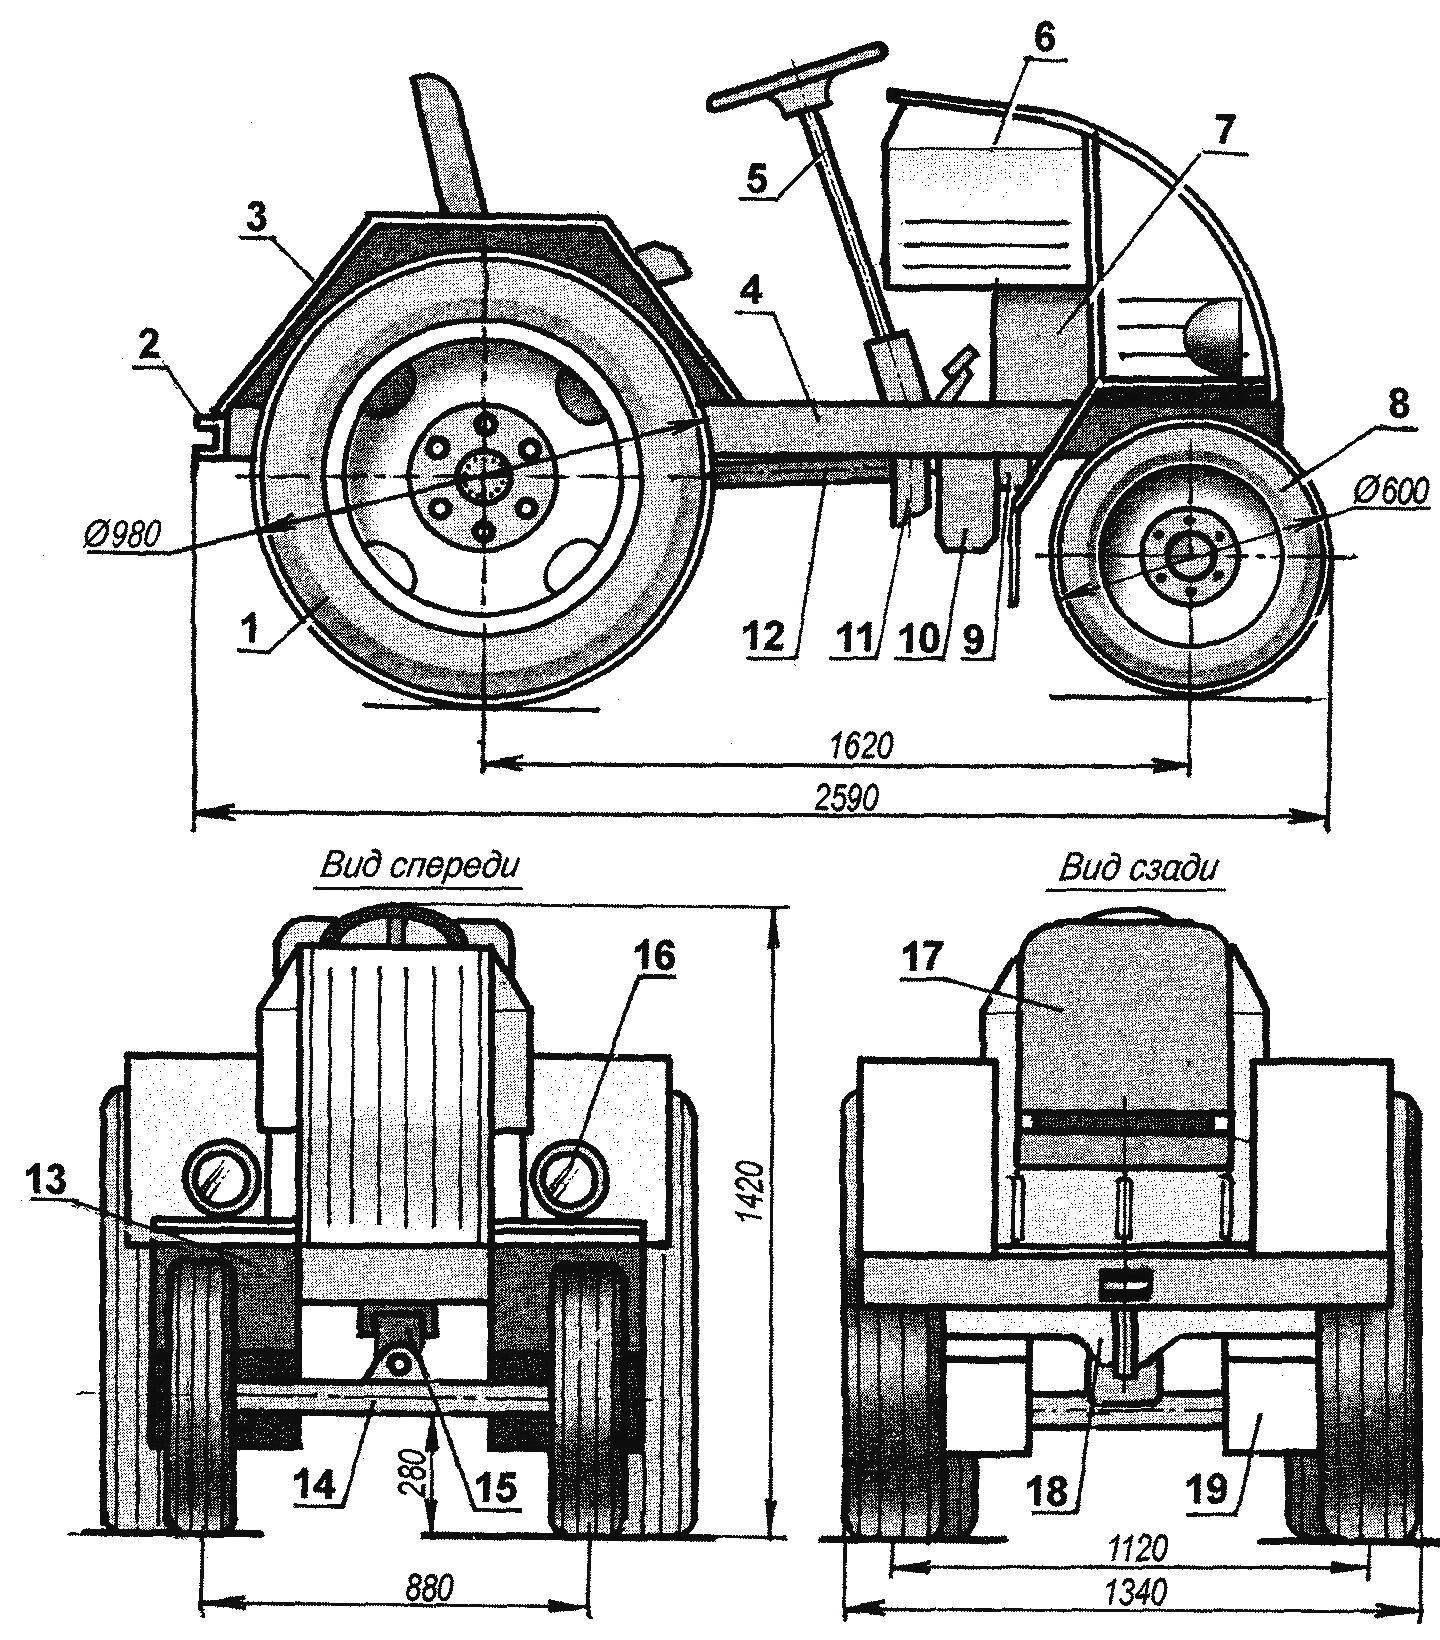 The layout of the tractor